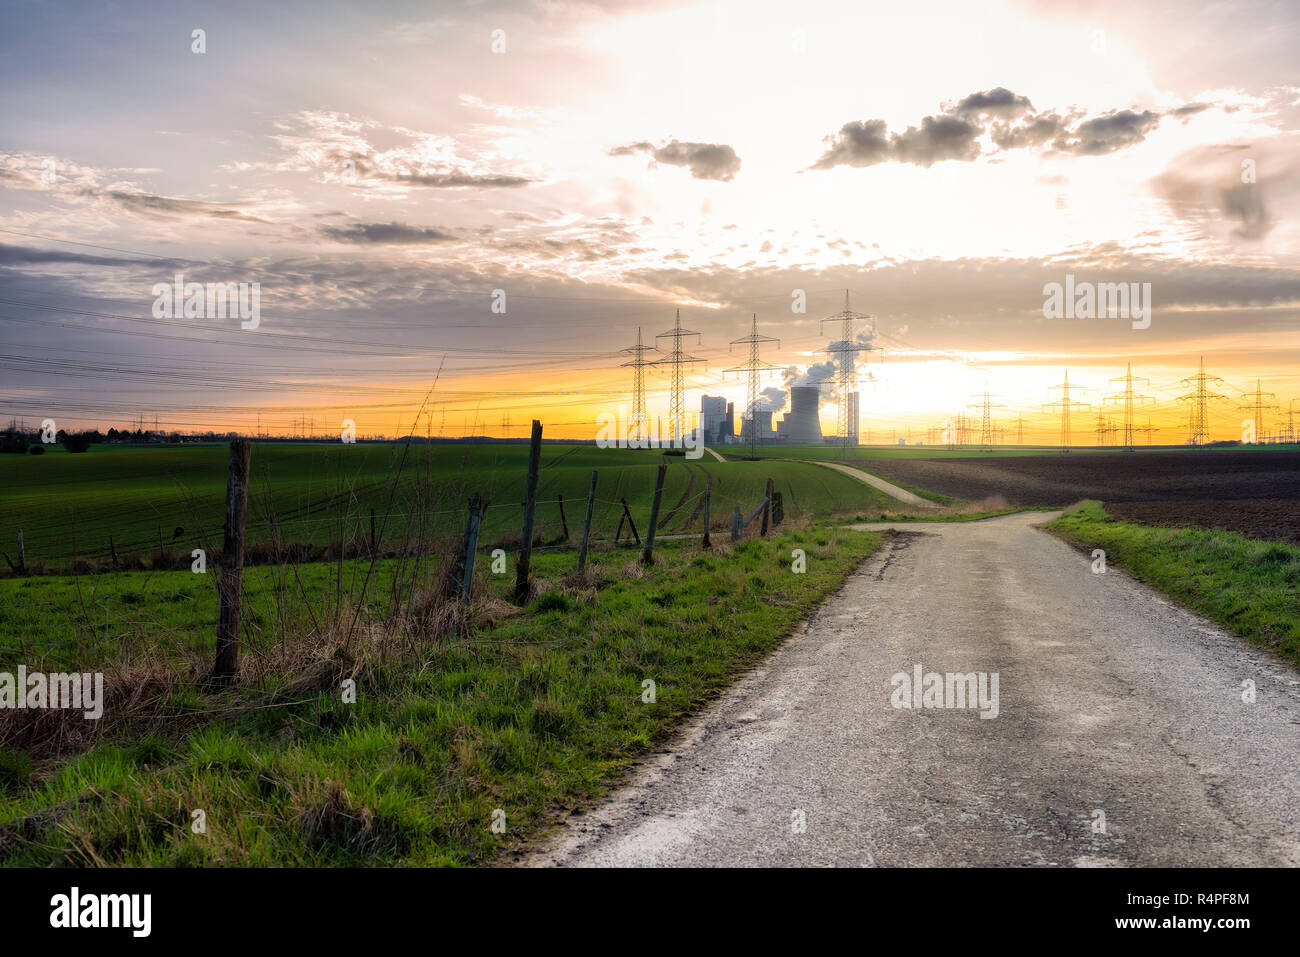 lignite-fired power plant with cooling towers Stock Photo